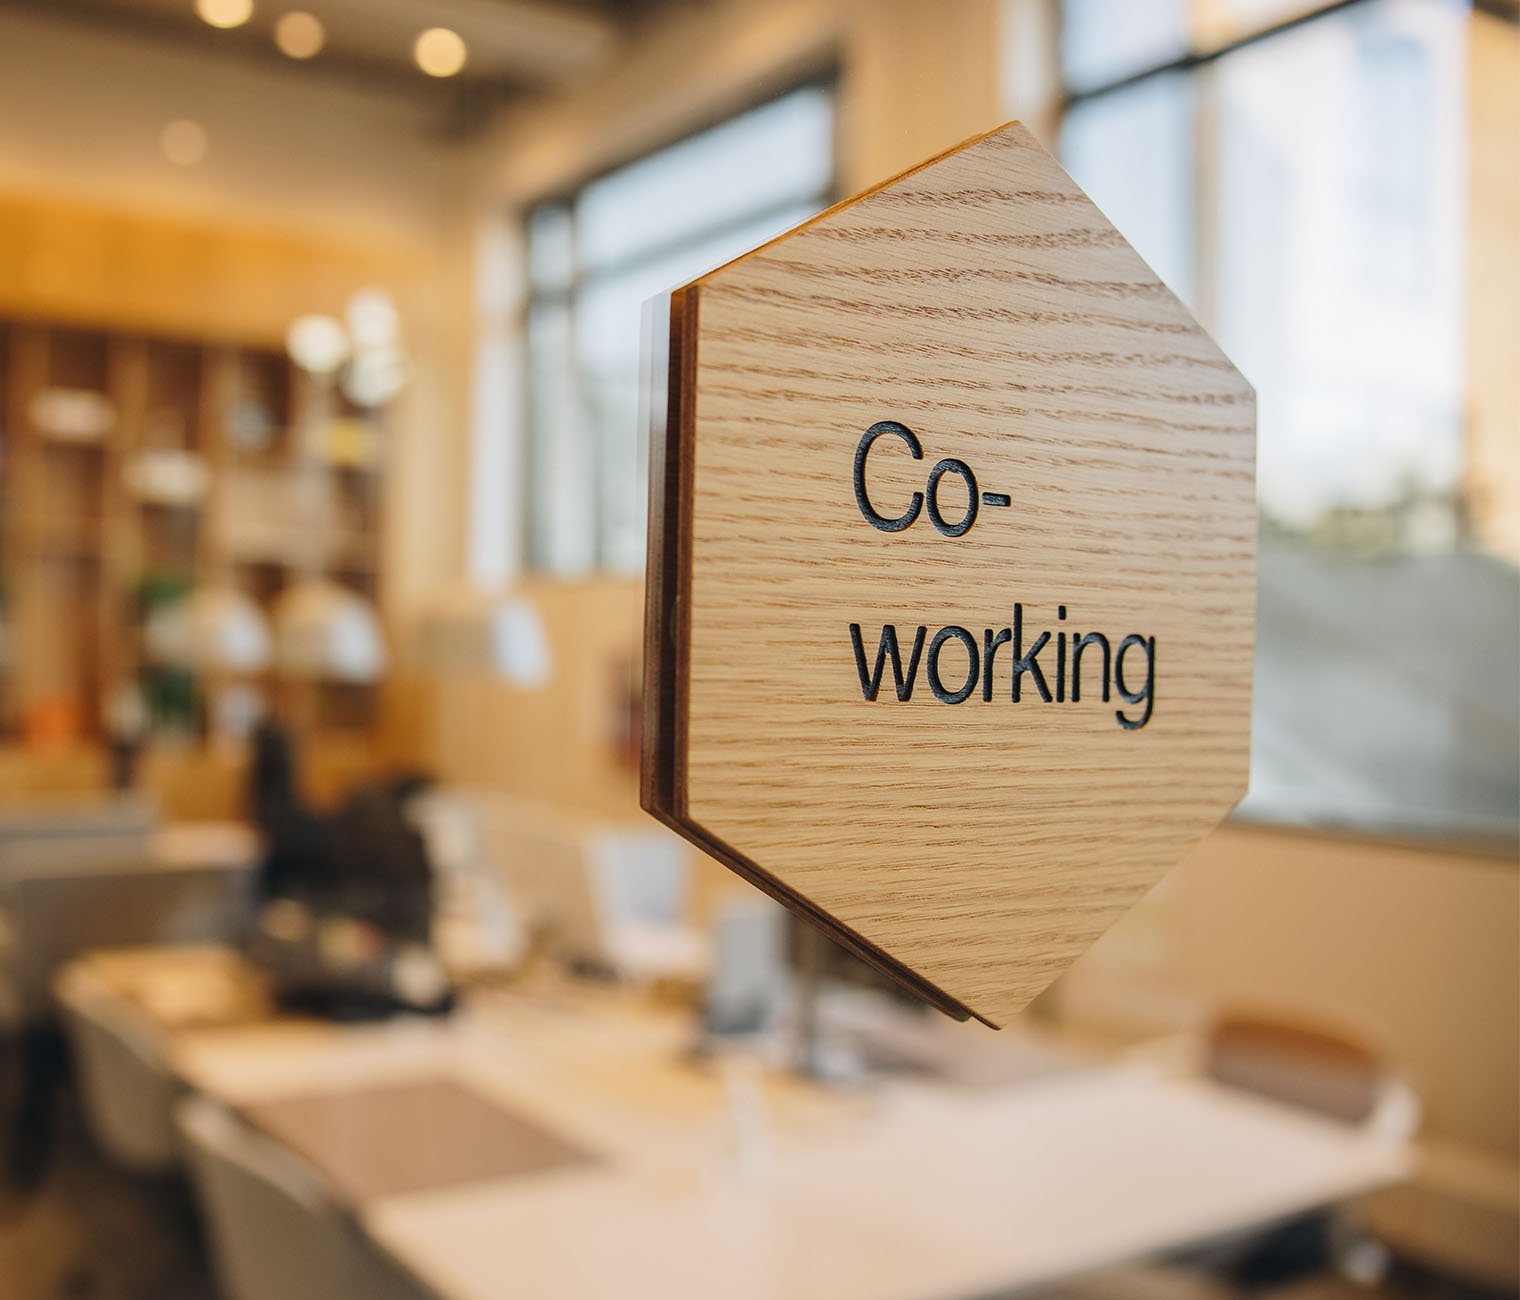 Wavenet-Connected-flexpace-workspaces-Co-working office space sign board